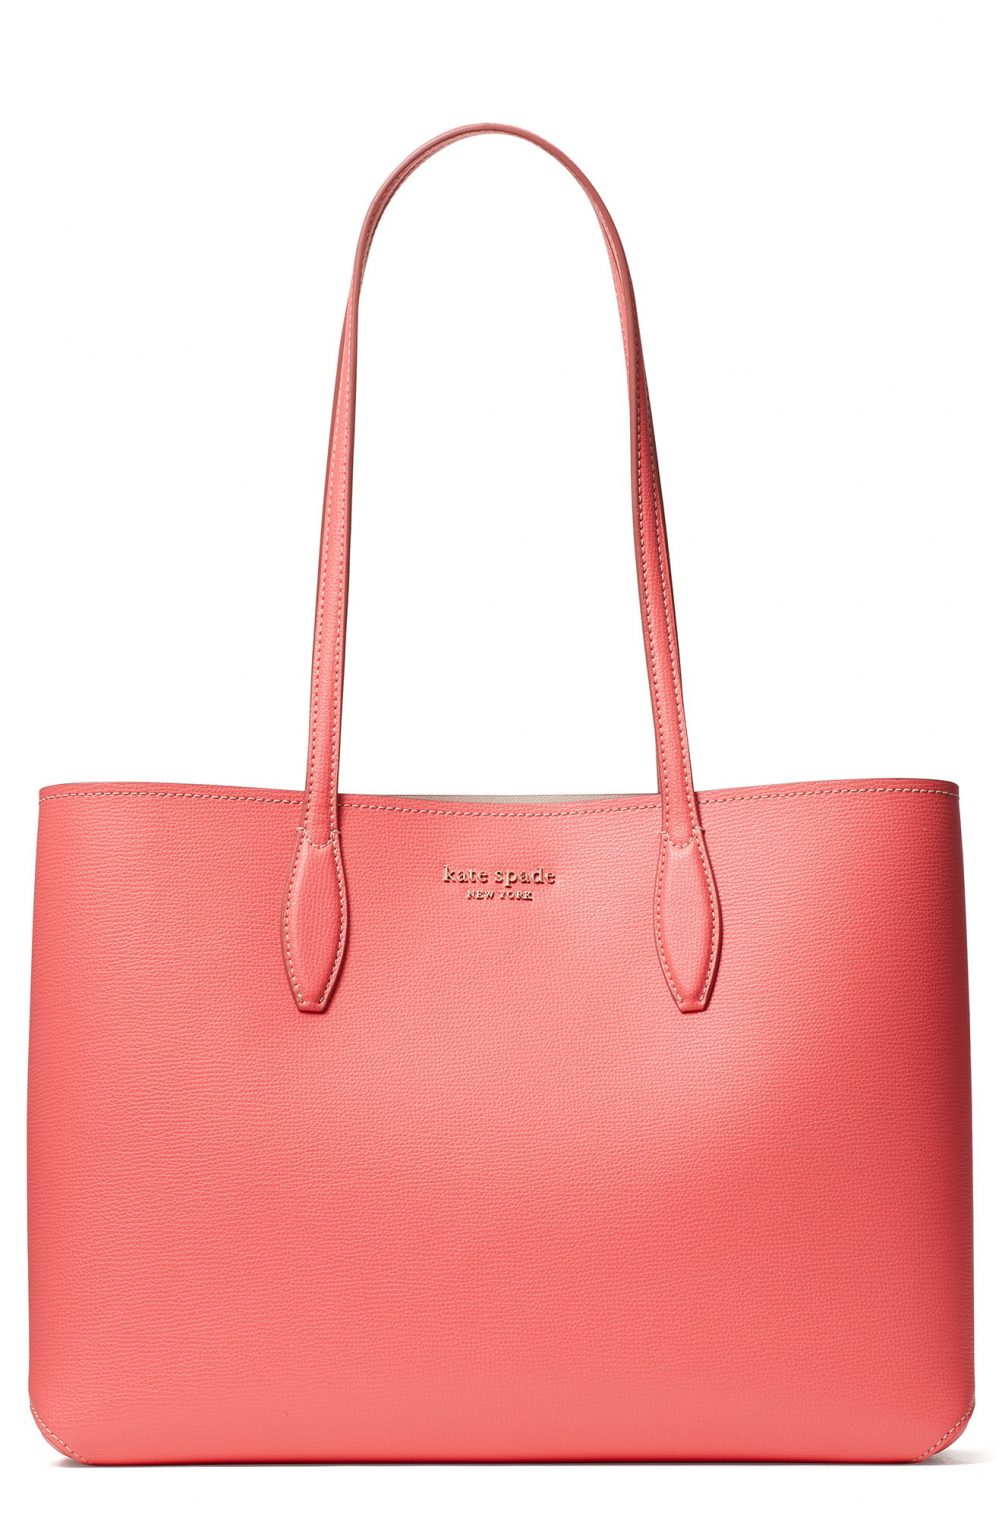 Kate Spade New York All Day Large Leather Tote - Pink | Fashion Gone Rogue